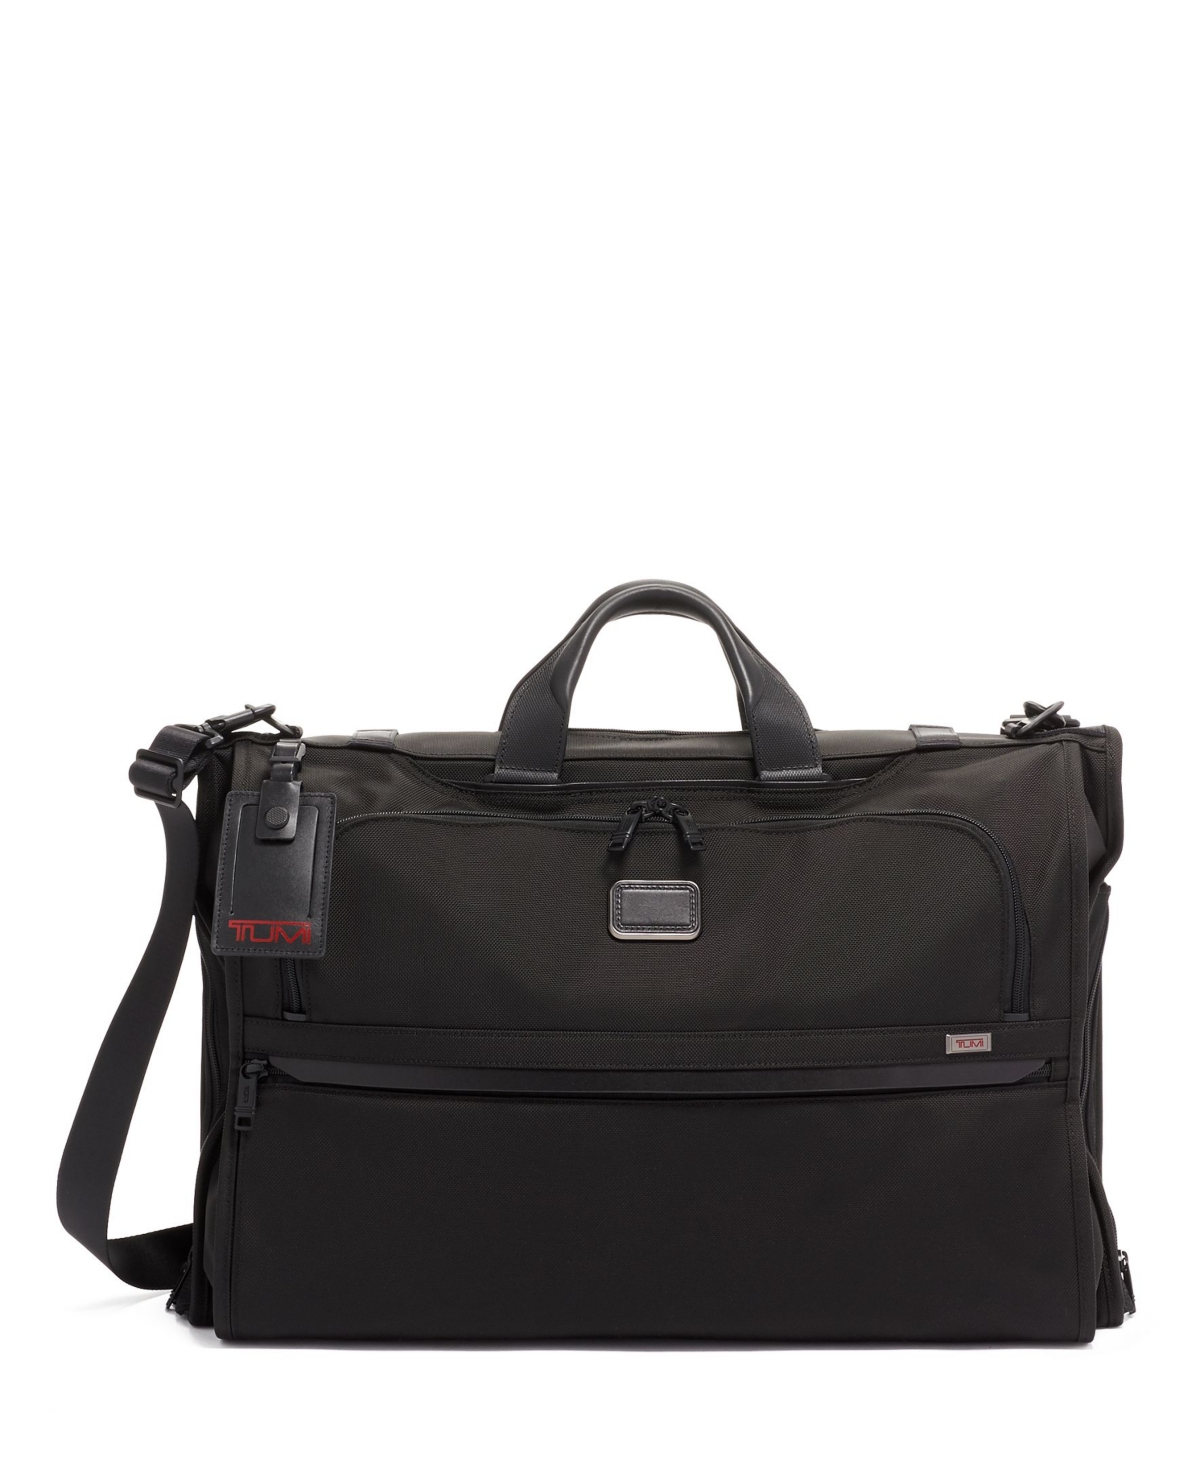 Tumi Alpha 3 Trifold 22-Inch Carry-On Garment Bag in Black at Nordstrom